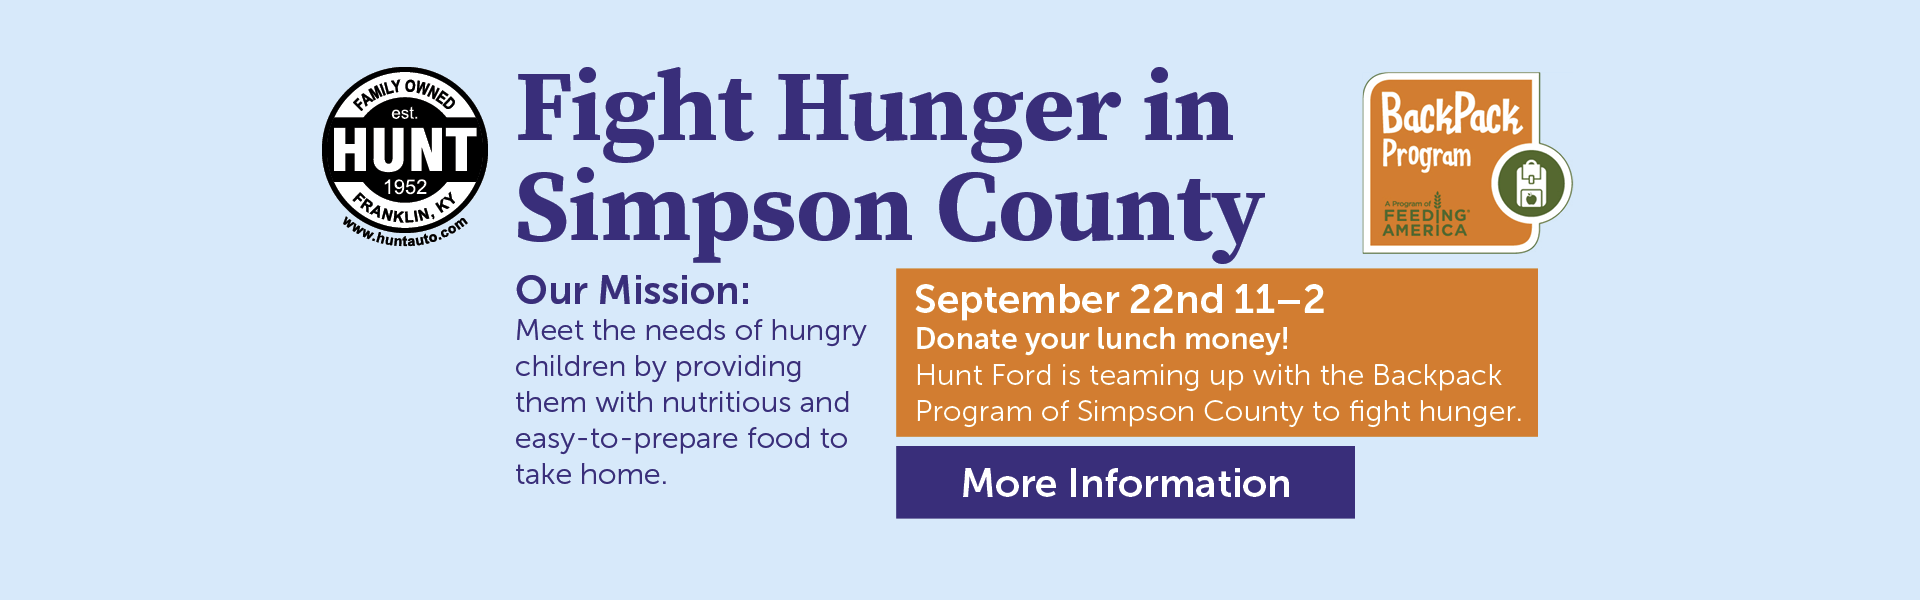 Graphic for Donate Your Lunch Money Event. Fight Hunger in Simpson County.